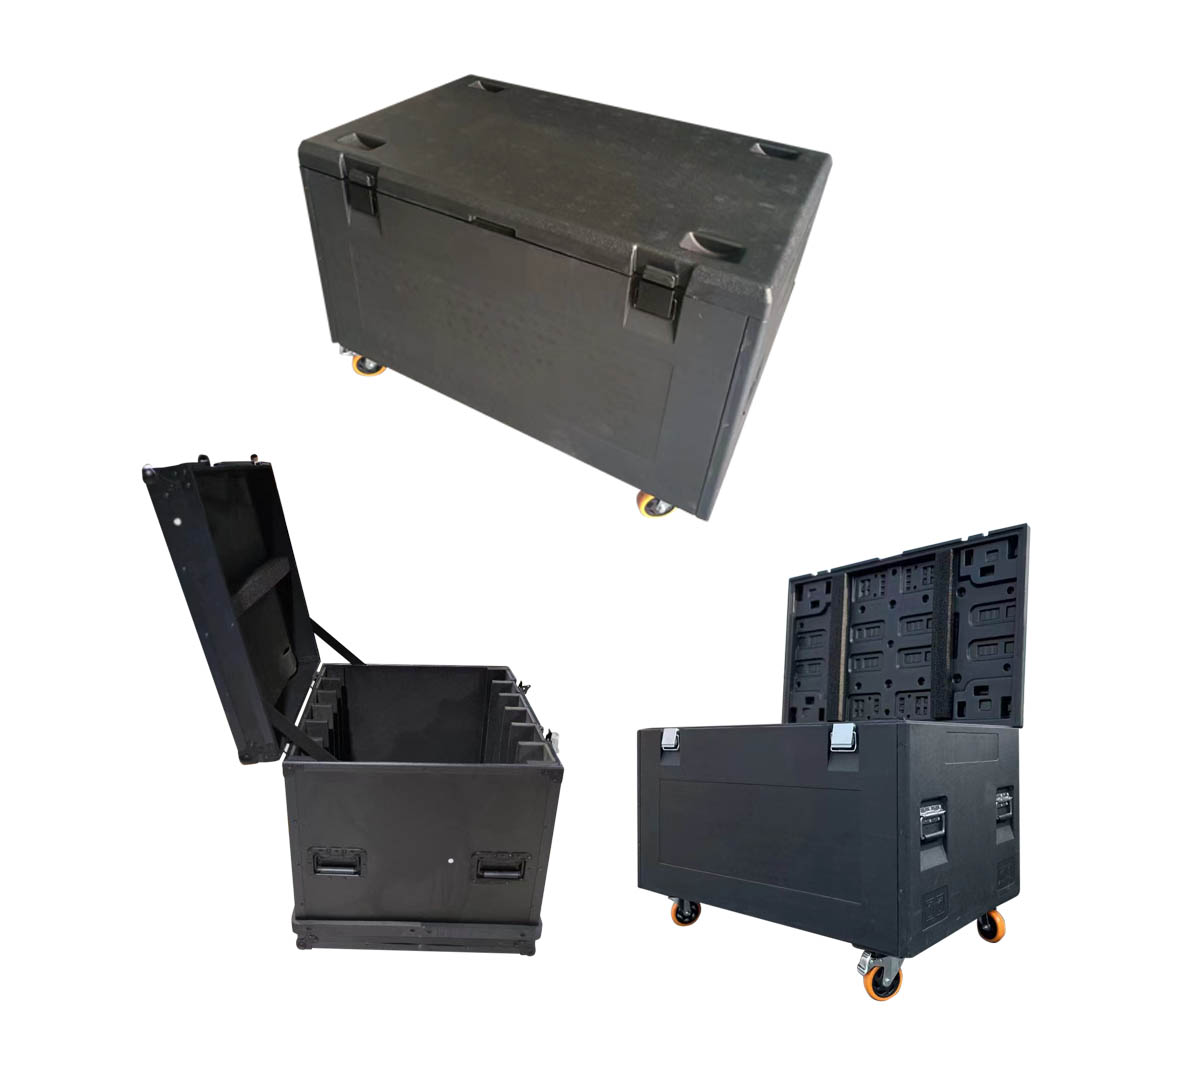 Plastic LED Flight Cases in input 6 500X1000mm cabinetLED Rental Display 1000 Cabinet  6 in 1 Plastic Carrying CaseLED Rental Display 1000 Cabinet  6 in 1 Plastic Carrying CaseLED Rental Display 1000 Cabinet  6 in 1 Plastic Carrying CaseLED Rental Display 500 Cabinet  6 in 1 Plastic Carrying Case